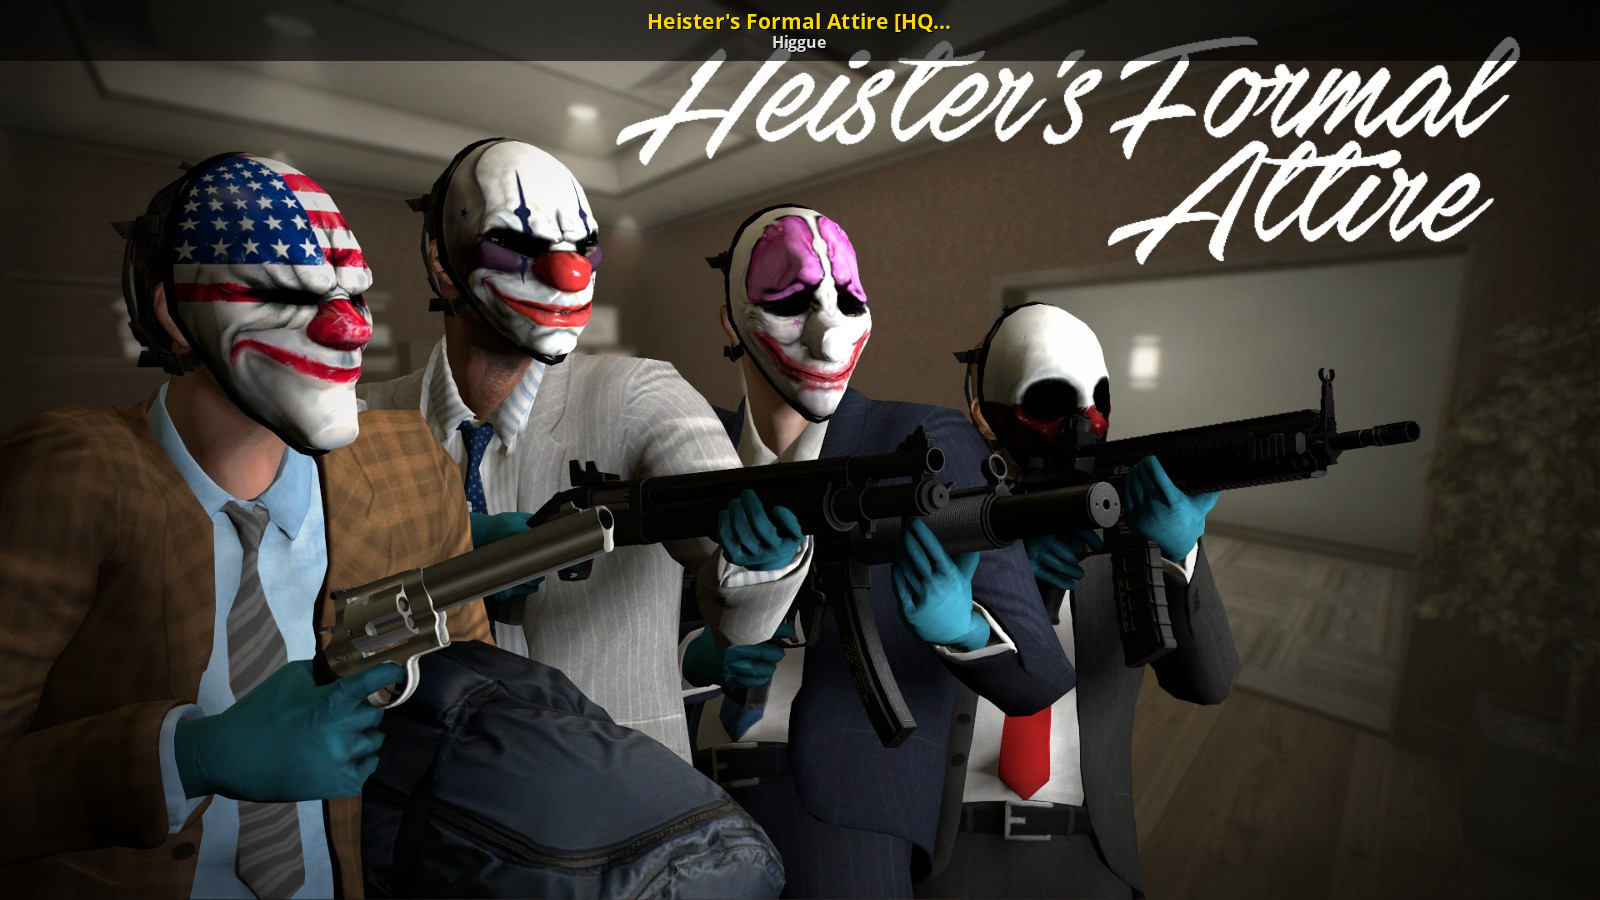 brian n smith recommends payday 2 ecchi mod pic